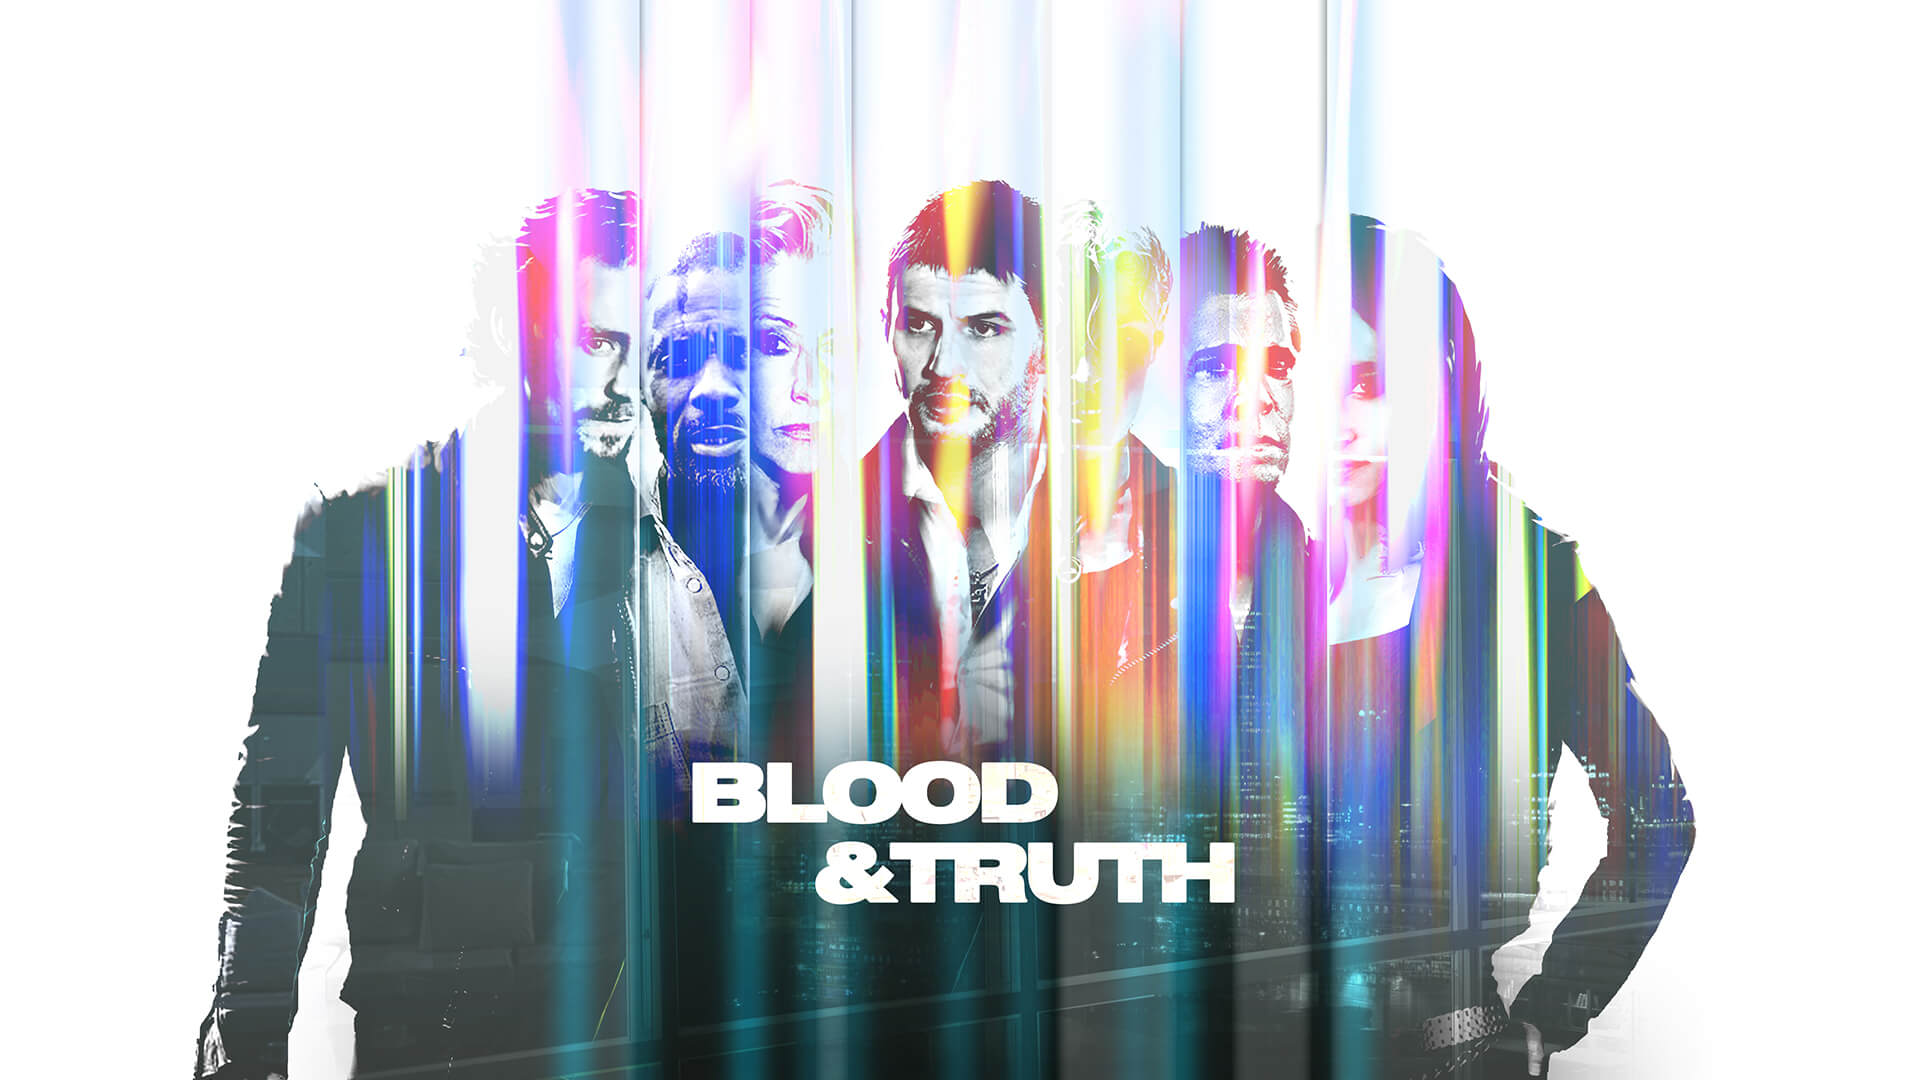 Blood and Truth